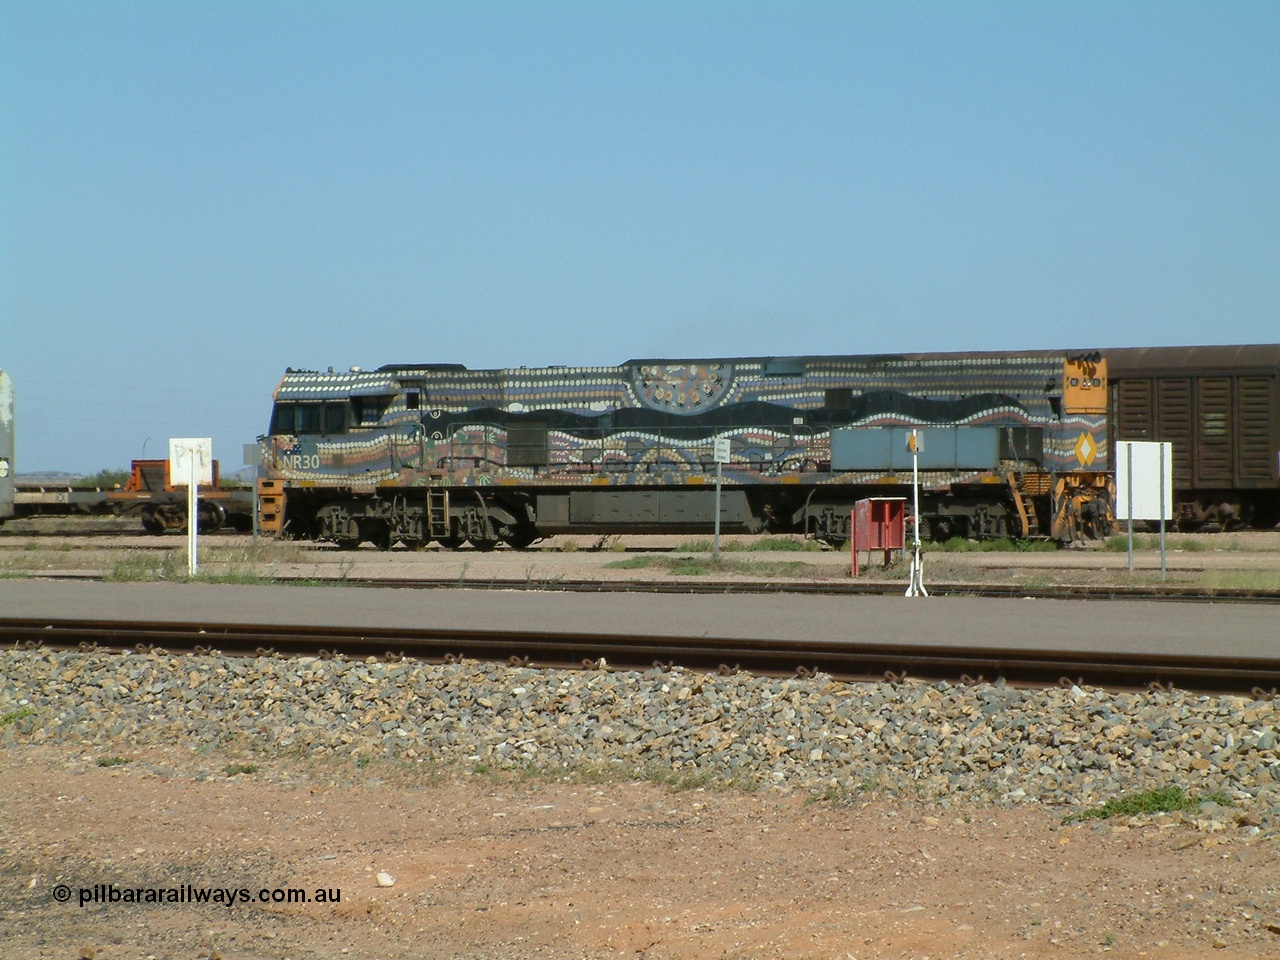 030404 103000
Port Augusta, Goninan built GE model Cv40-9i NR class unit NR 30 serial 7250-05 / 97-232 was painted in a Bessie Liddle of Alice Springs designed aboriginal livery titled 'Warmi' or the snake, John Moriarty of Balarinji Design did the artwork.
Keywords: NR-class;NR30;Goninan;GE;Cv40-9i;7250-05/97-232;